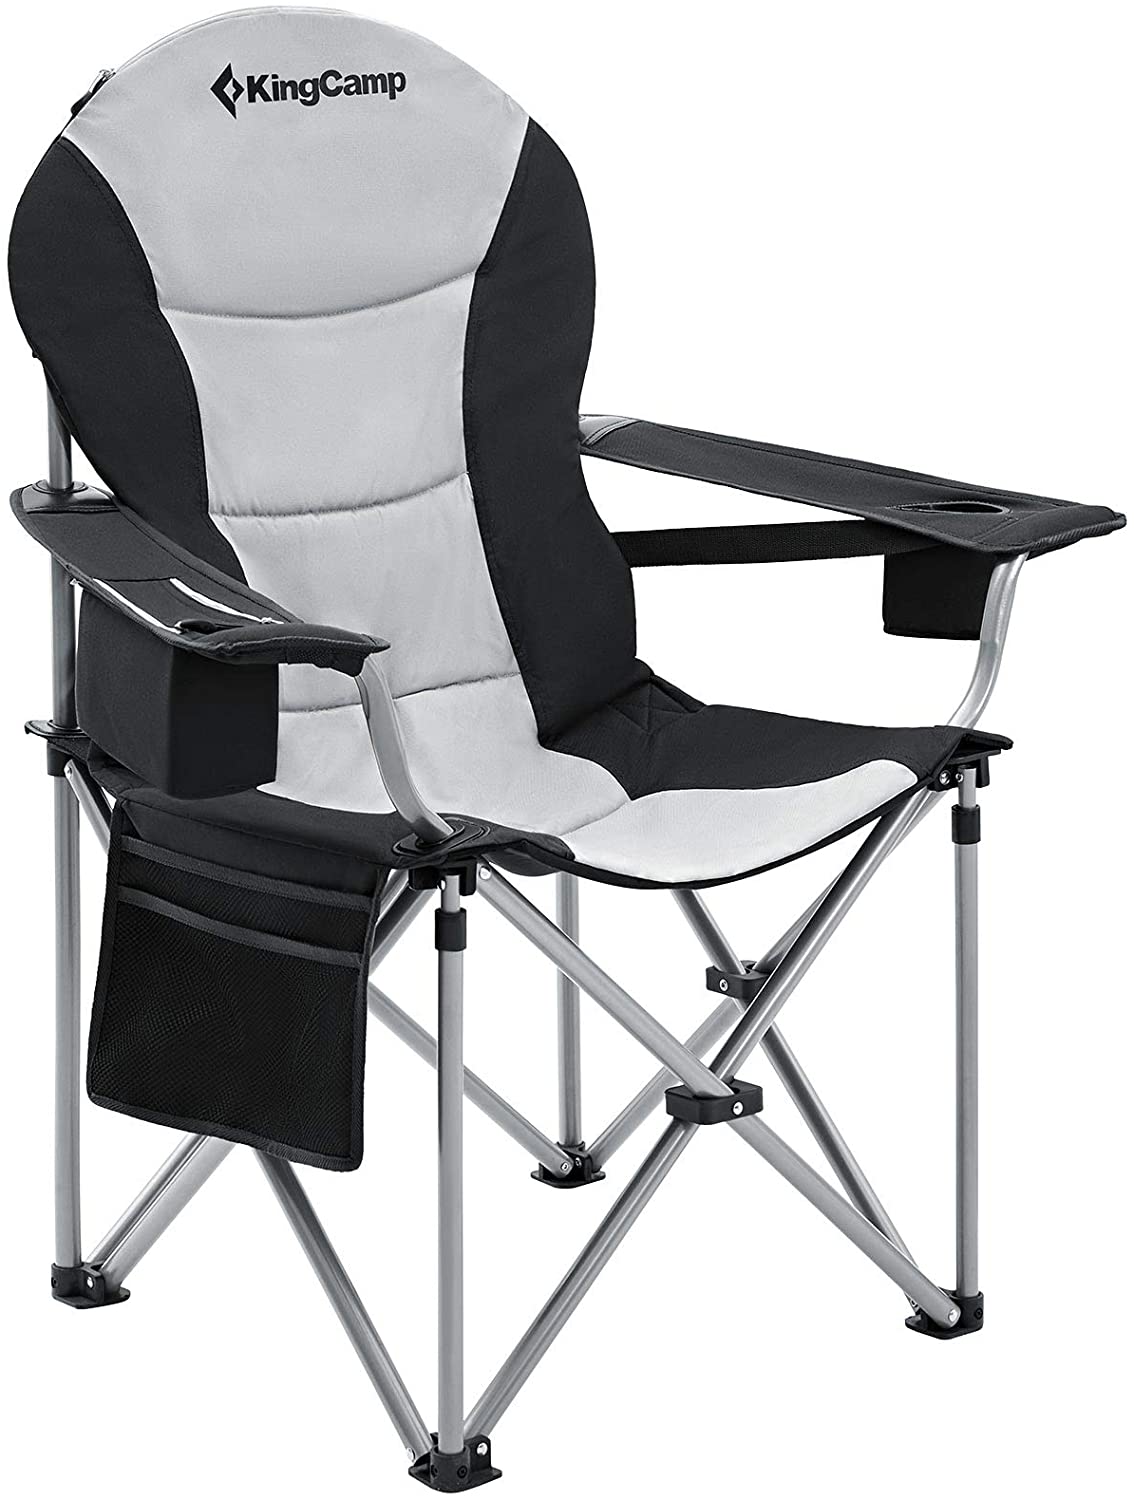 KingCamp Oversized Folding Camping Chair $74.99